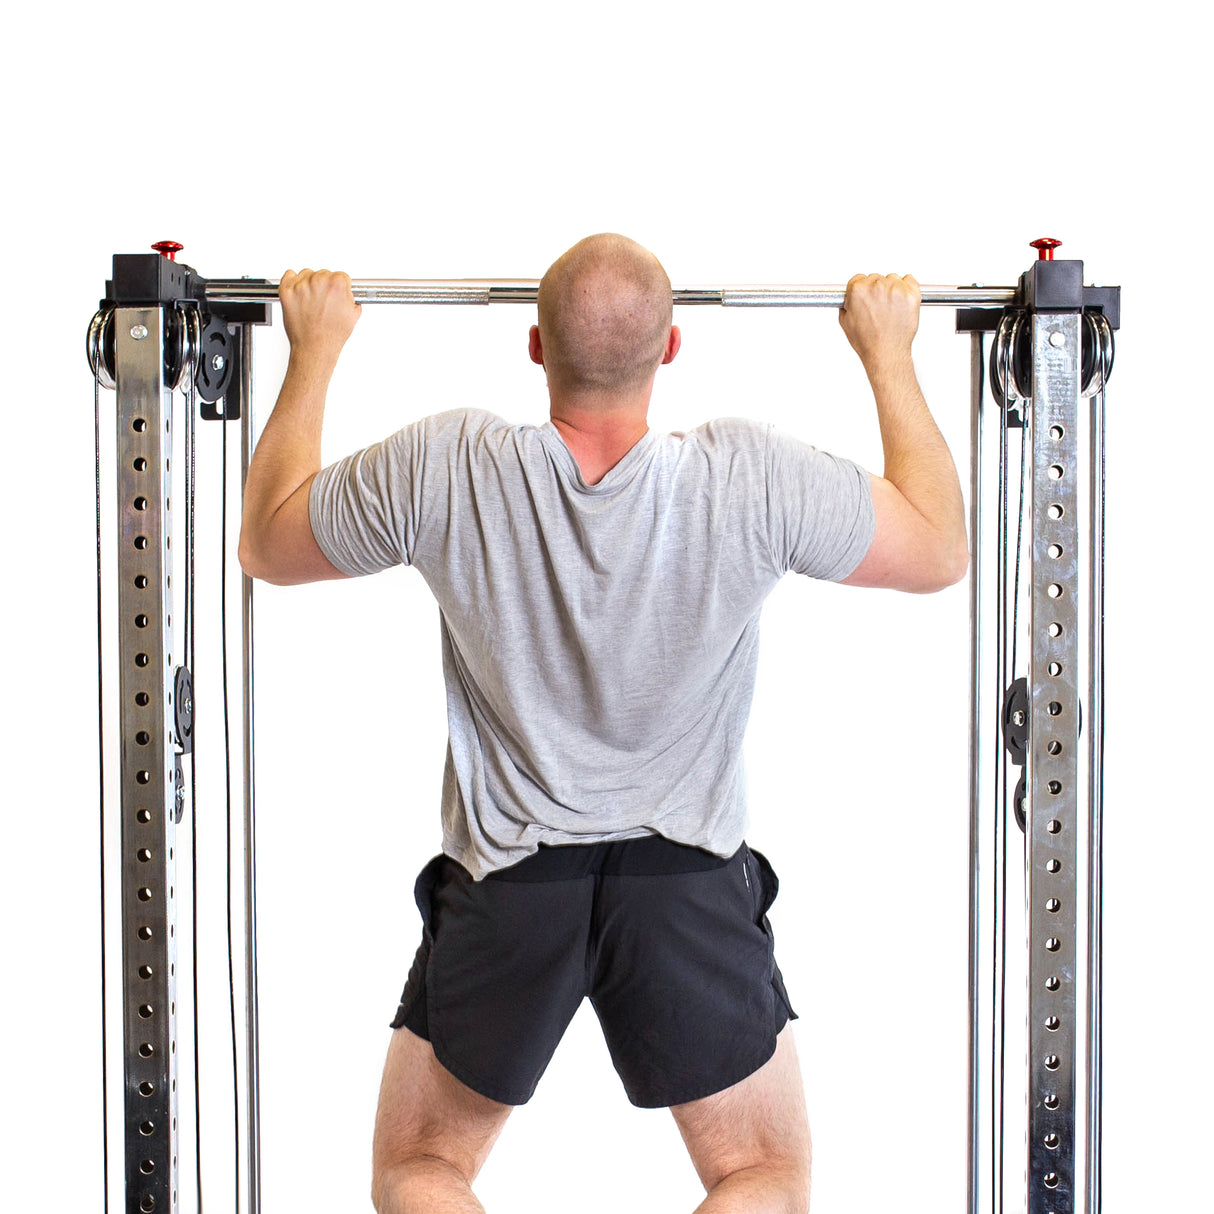 Cable Tower Squat Stands